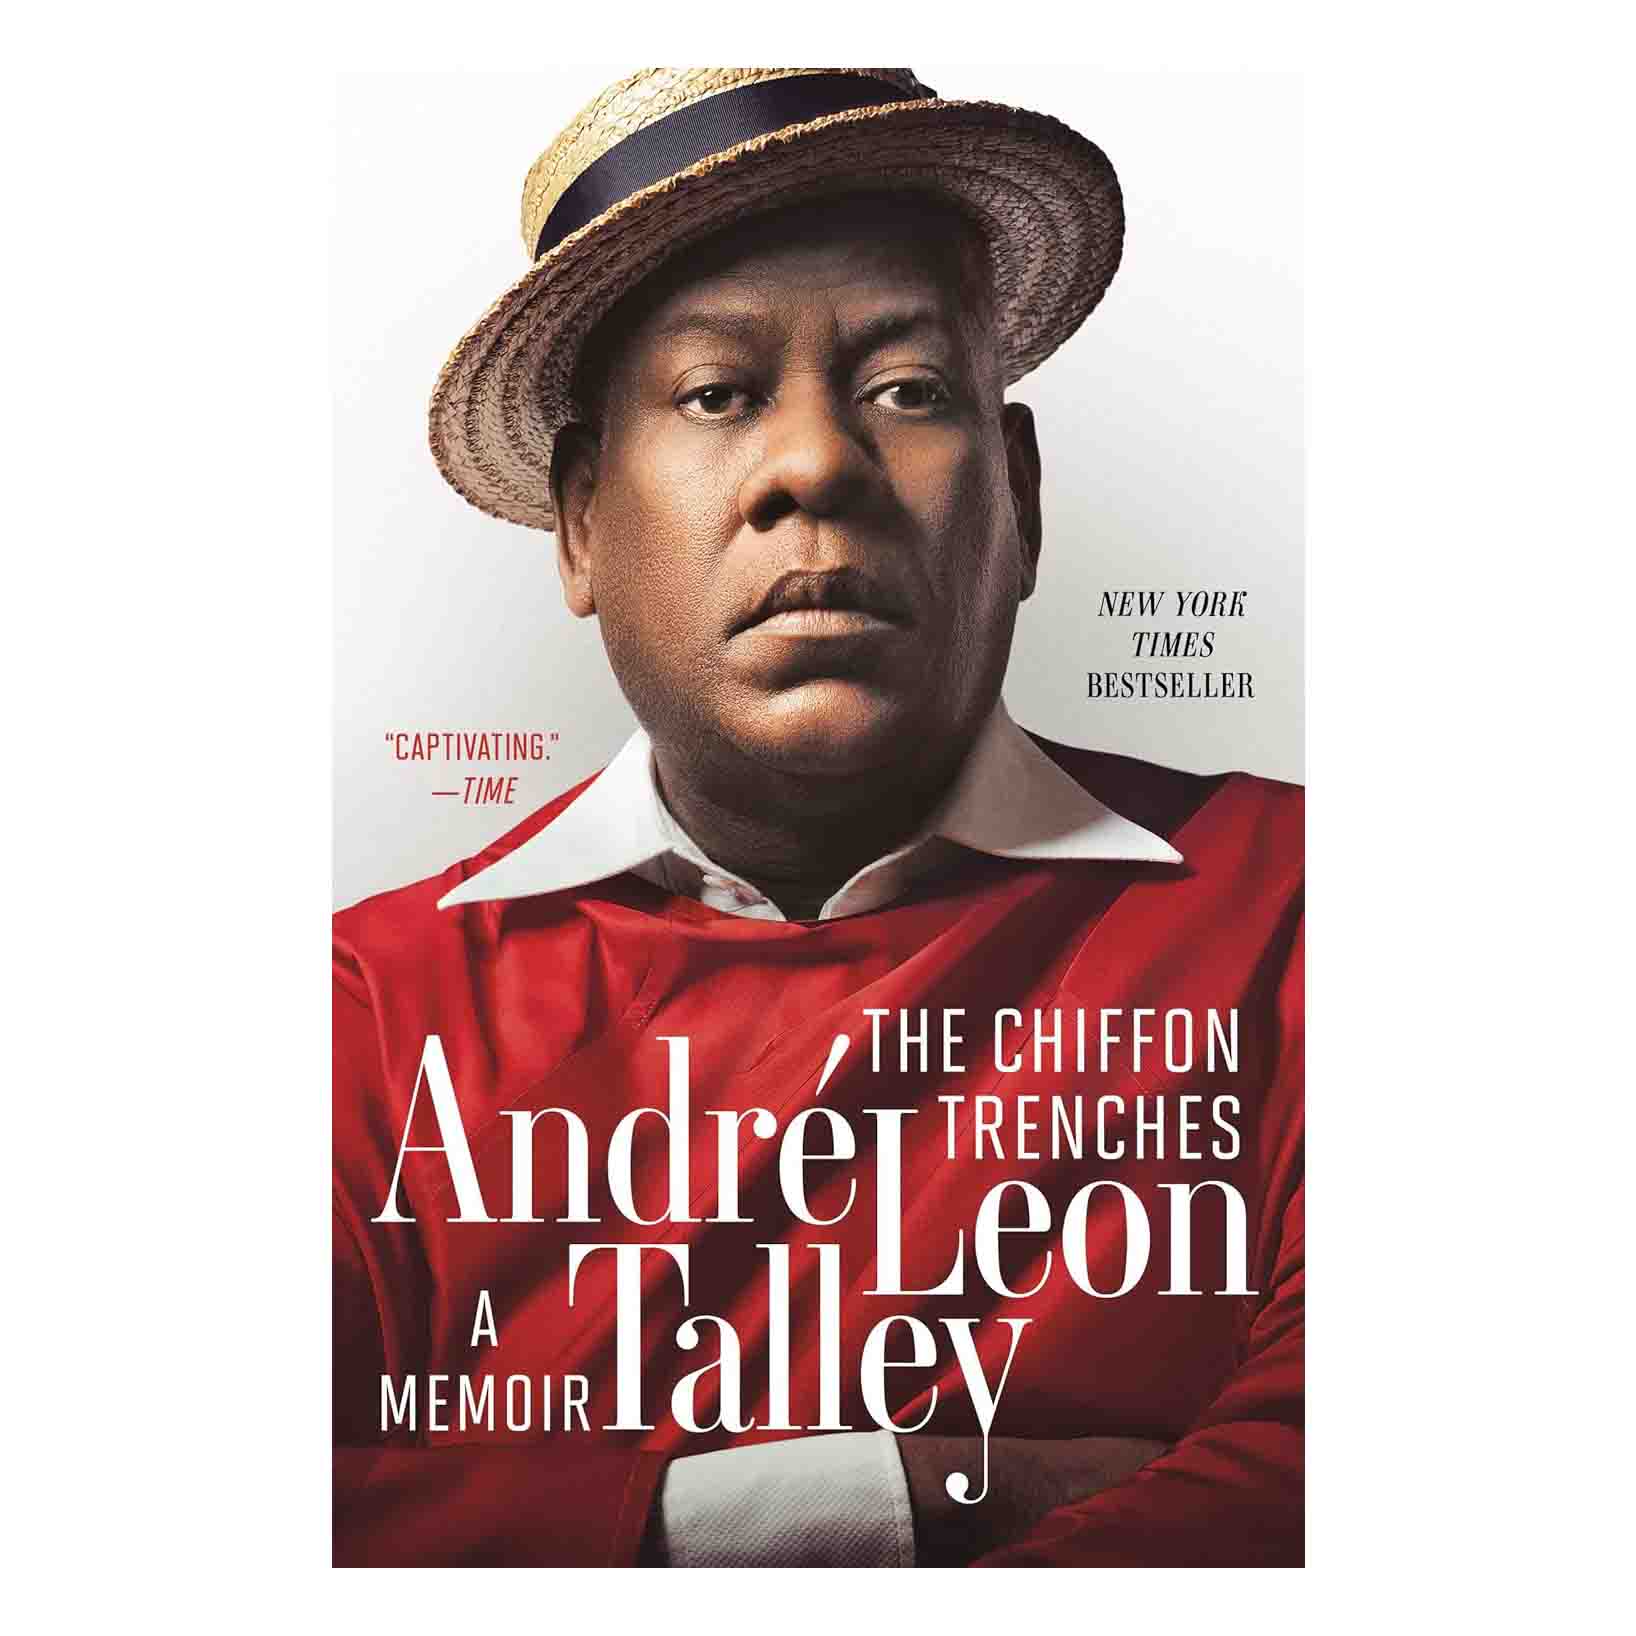 book titled The Chiffon Trenches by André Leon Talley